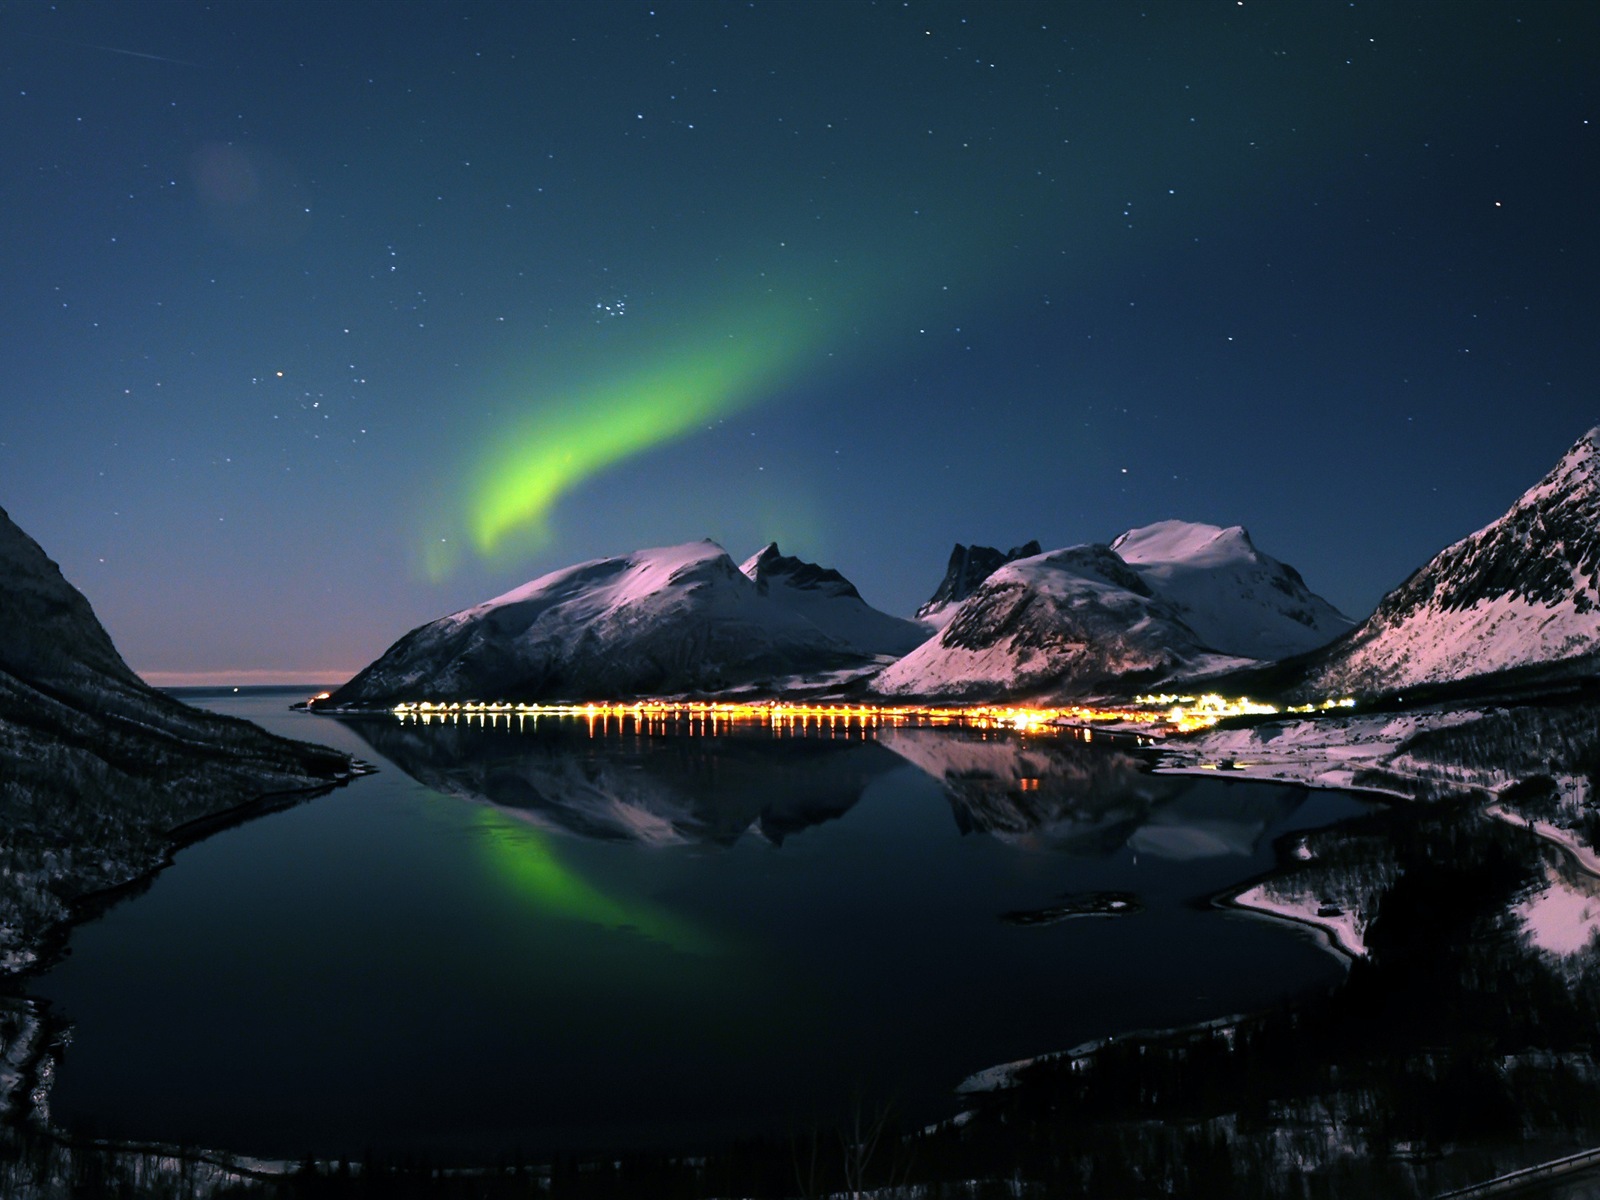 Natural wonders of the Northern Lights HD Wallpaper (2) #2 - 1600x1200